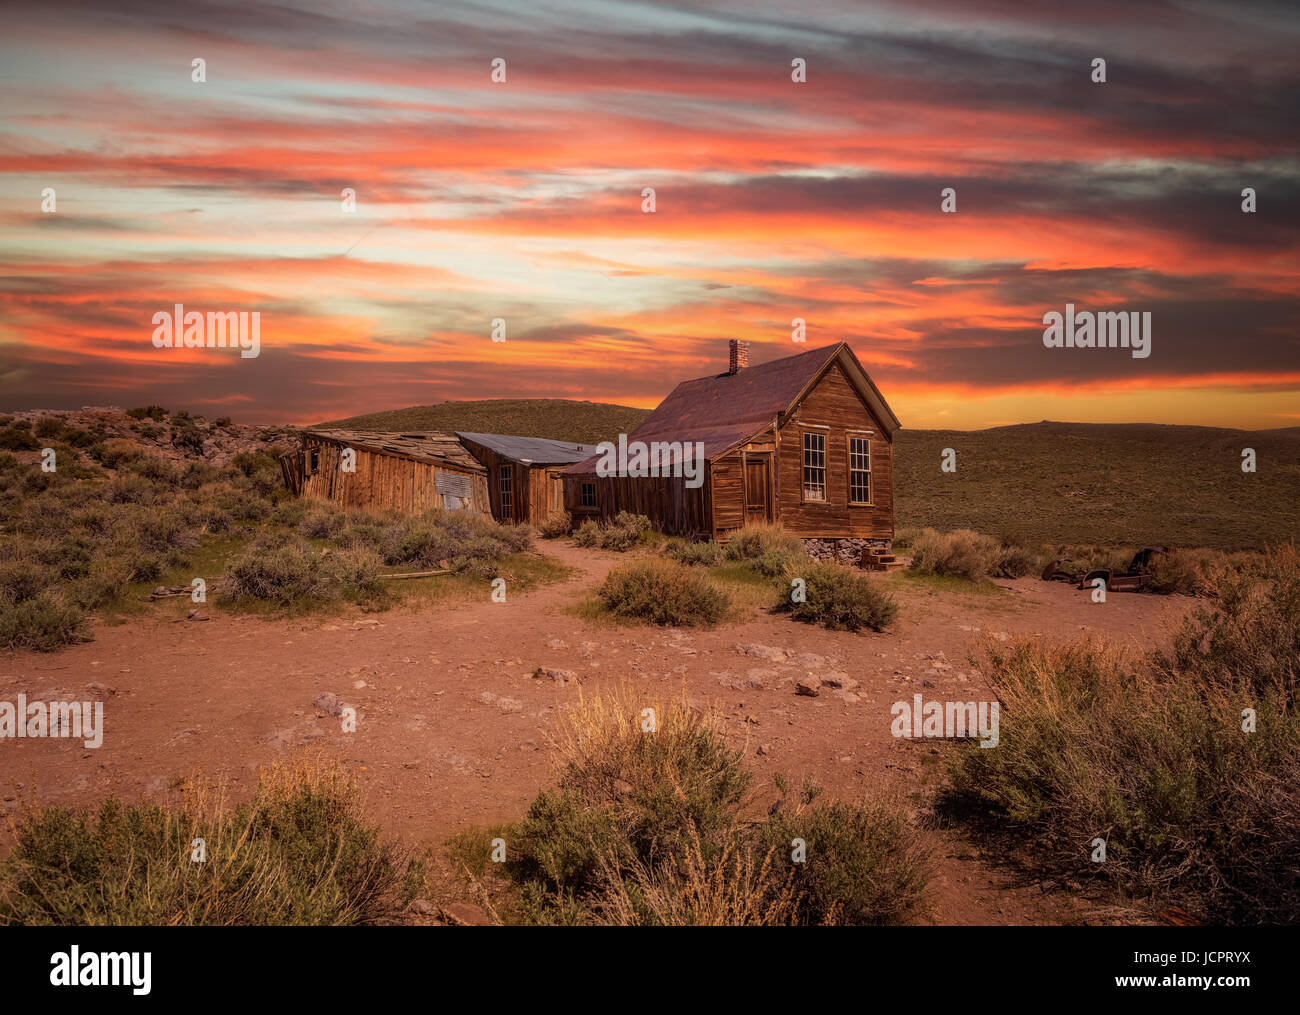 Sunset over Bodie ghost town in California. Bodie is a historic state park from a gold rush era  in the Bodie Hills east of the Sierra Nevada. Stock Photo